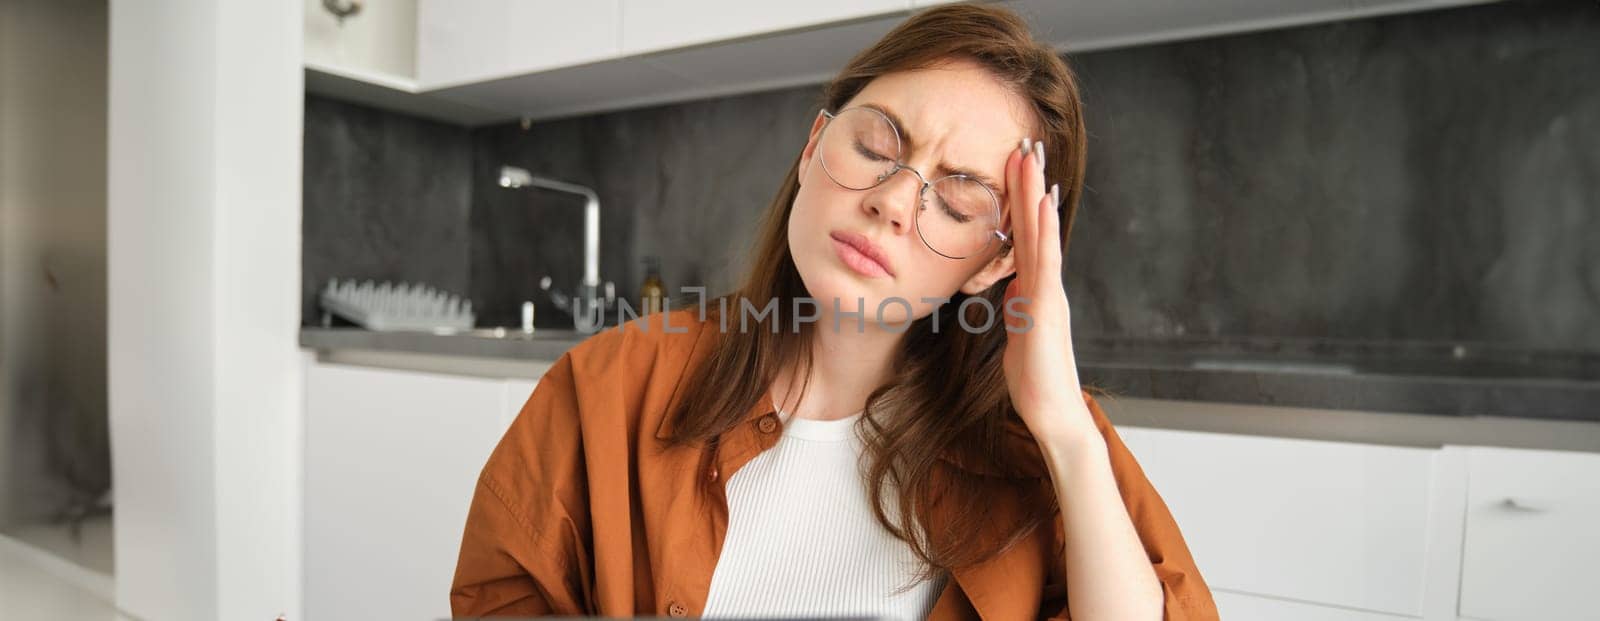 Portrait of young woman sitting at home with digital tablet, feeling unwell, touching head and frowning from pain, has headache or migraine, working while feeling sick.